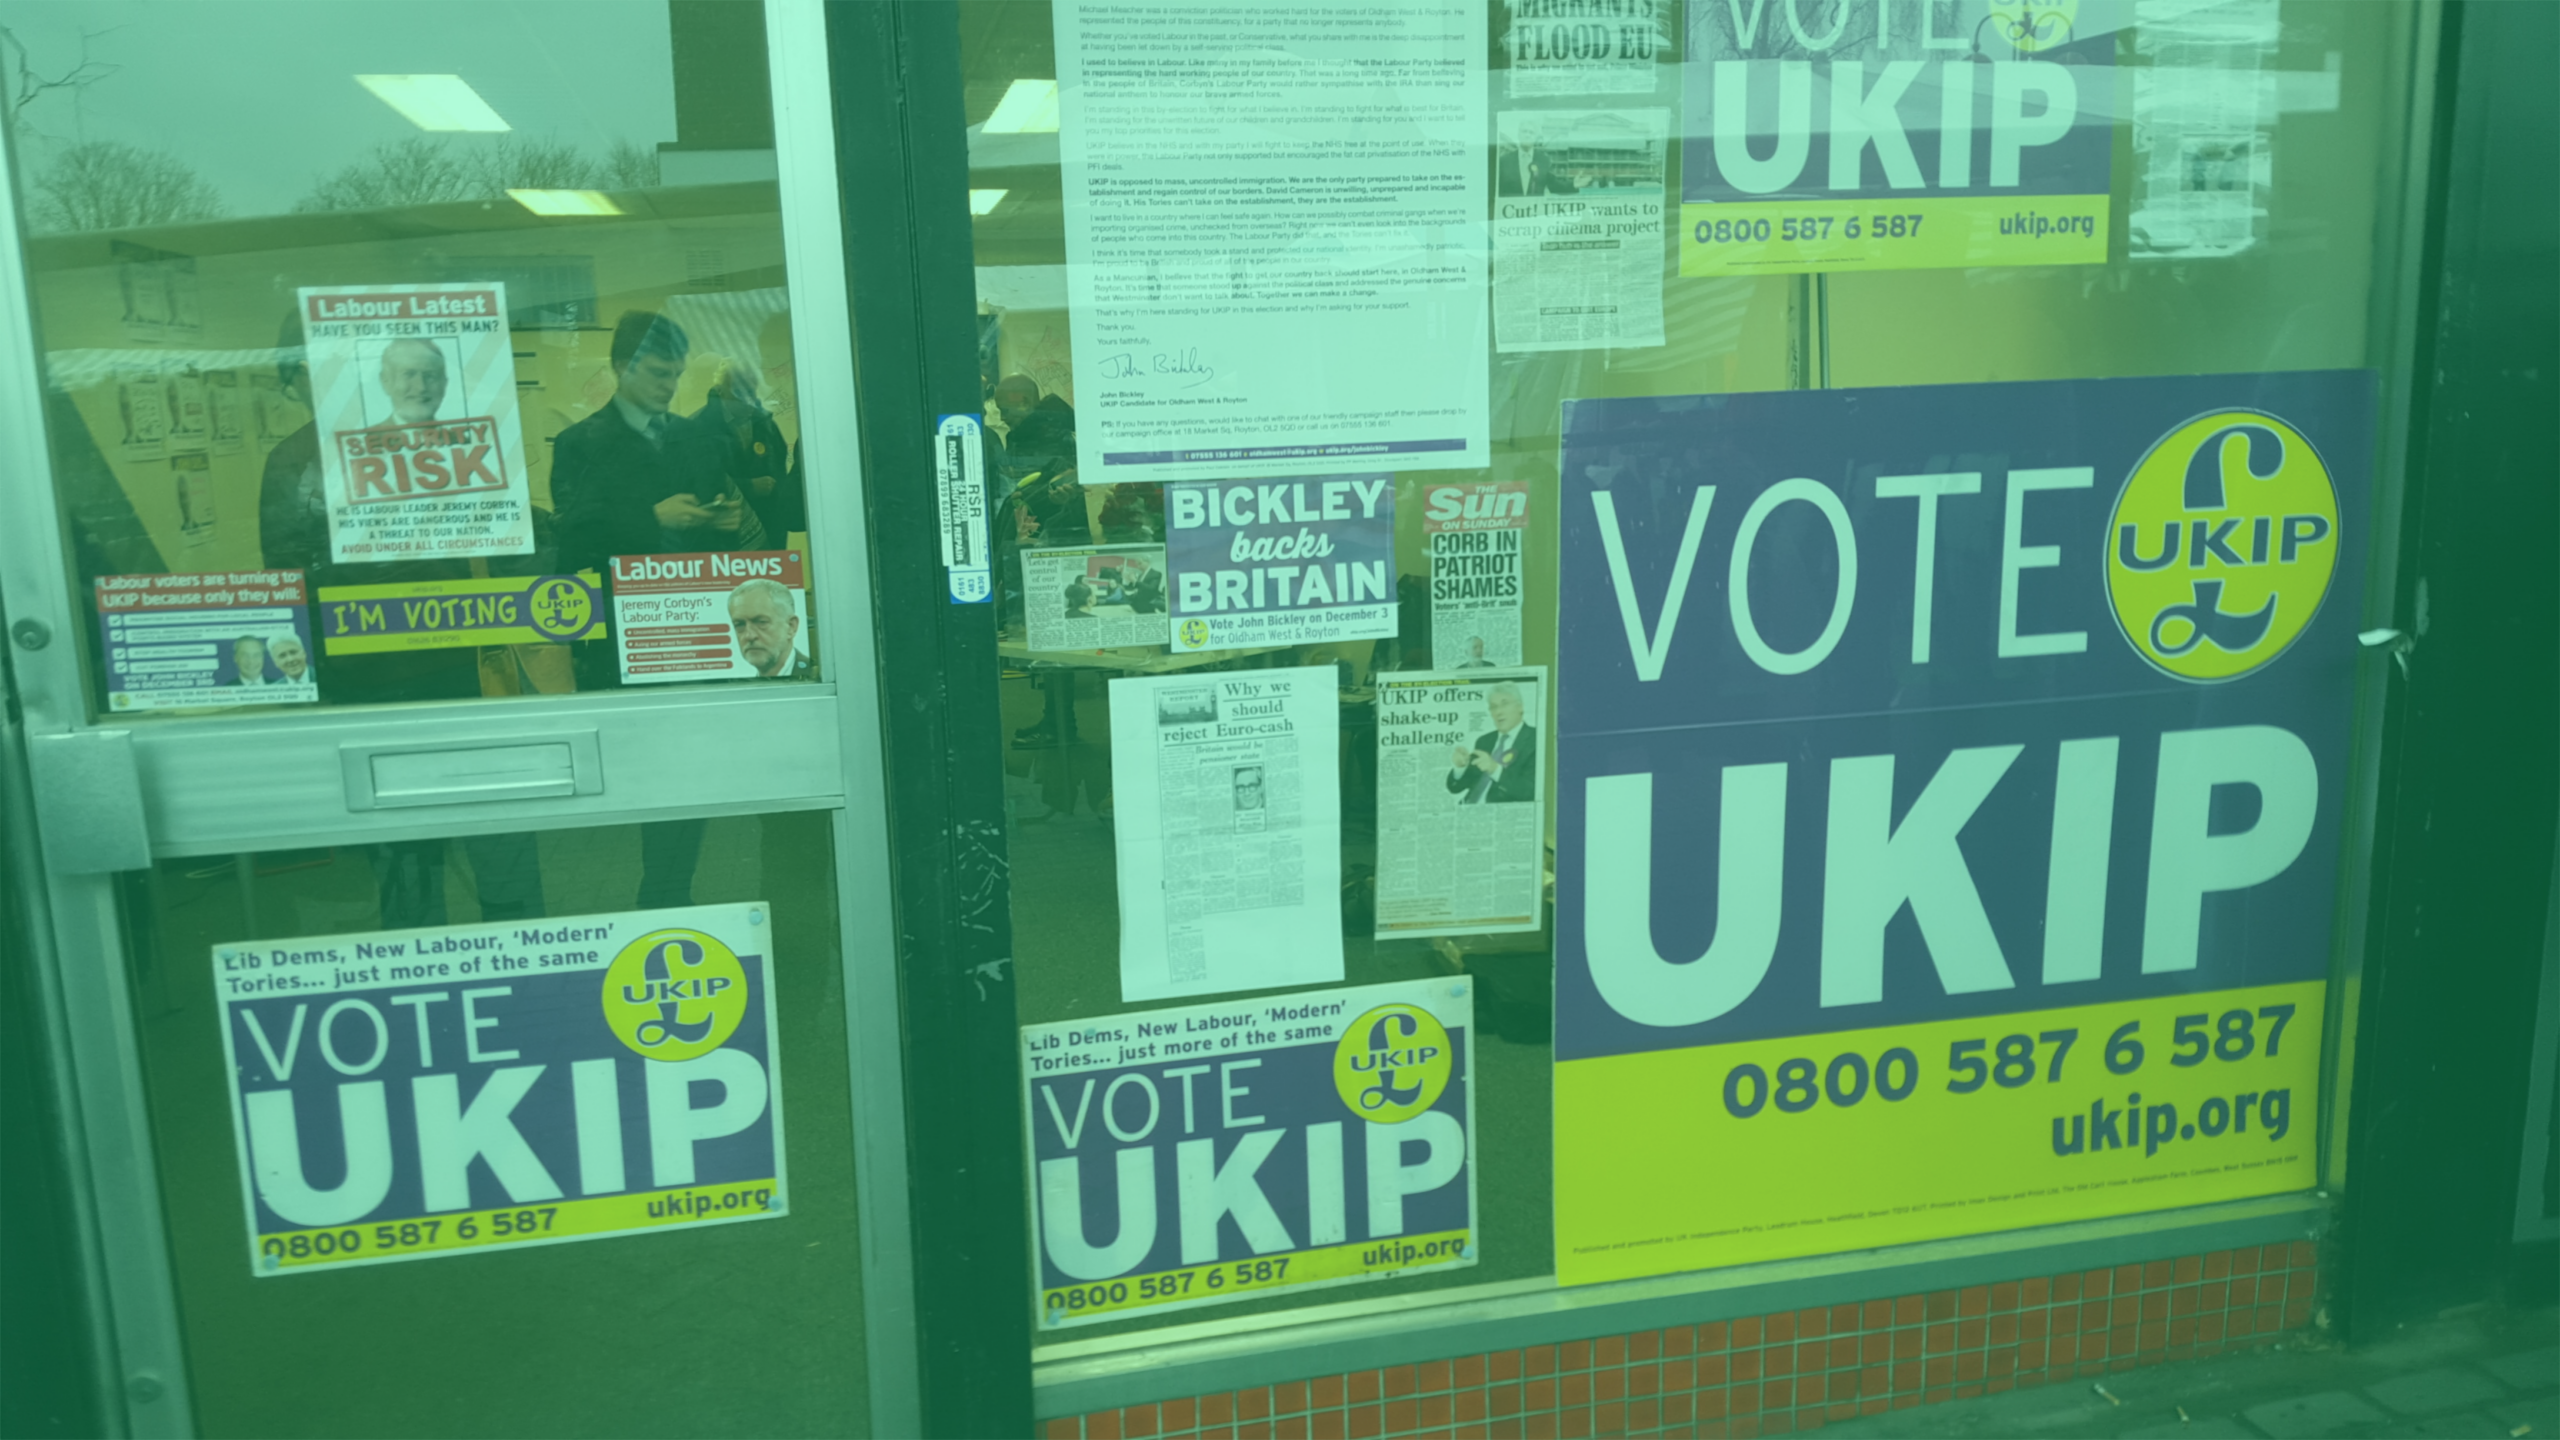 Photo: "UKIP office", by Rathfelder, licensed under CC BY-SA 4.0. Hue modified from the original